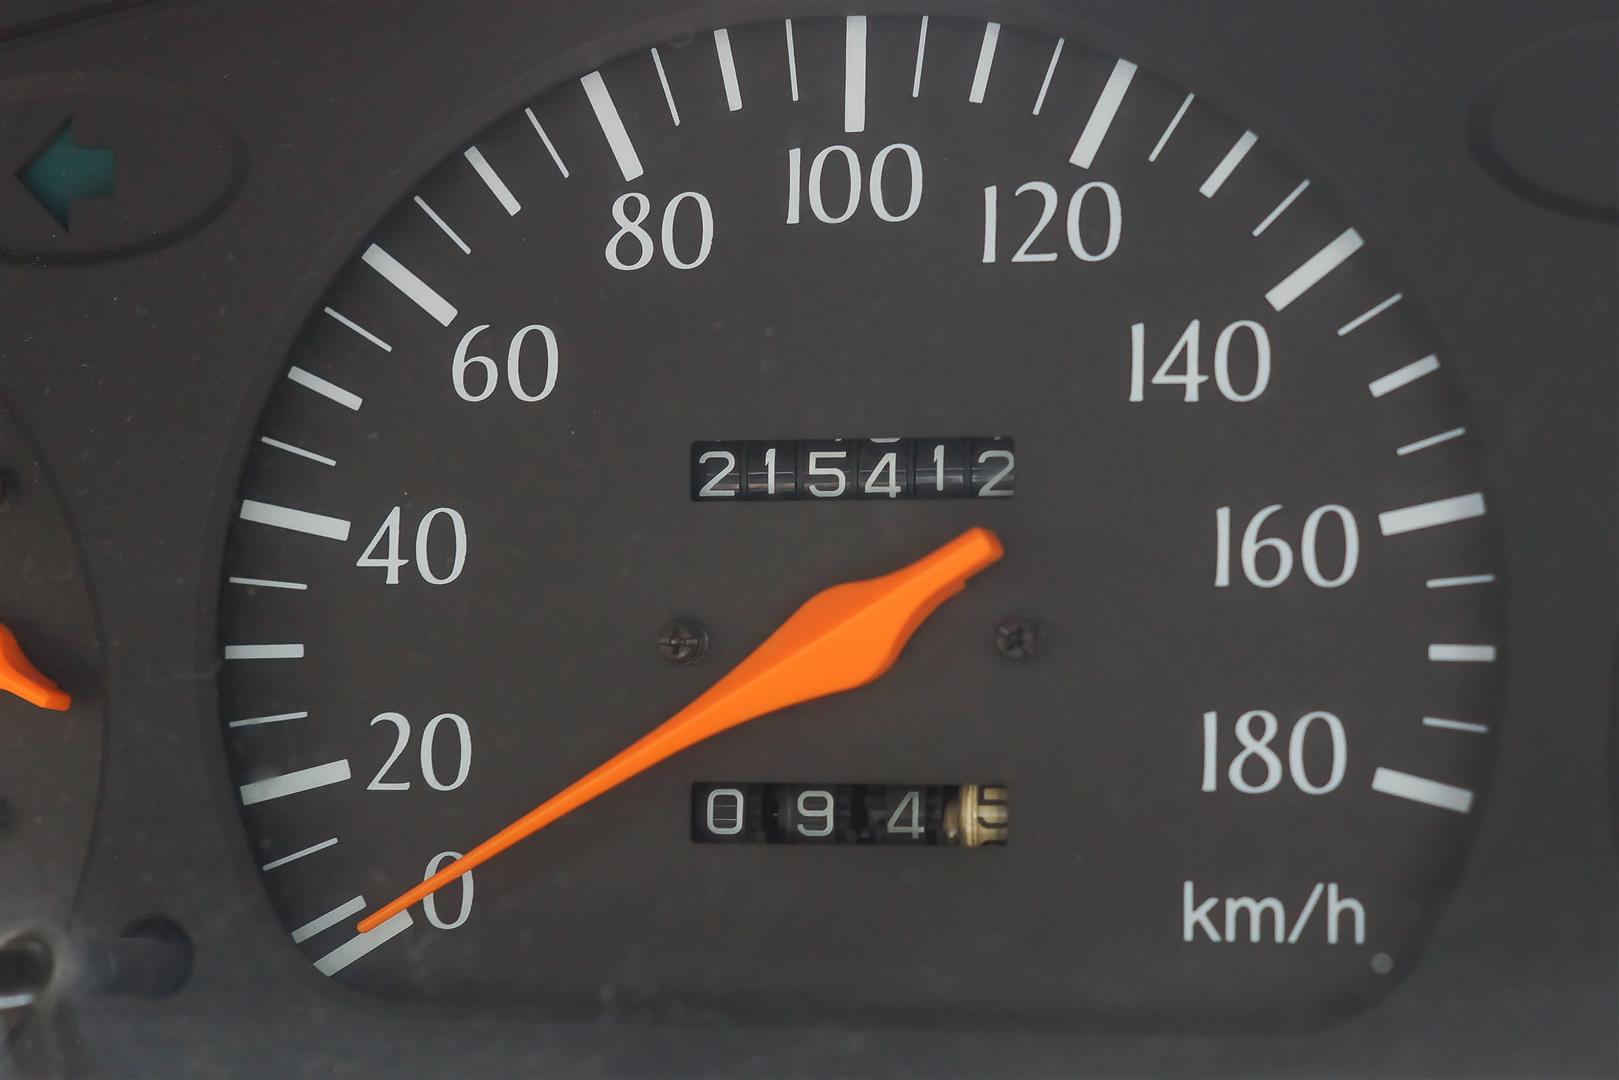 What You Should Know Once Your Vehicle Hits 200,000 Miles